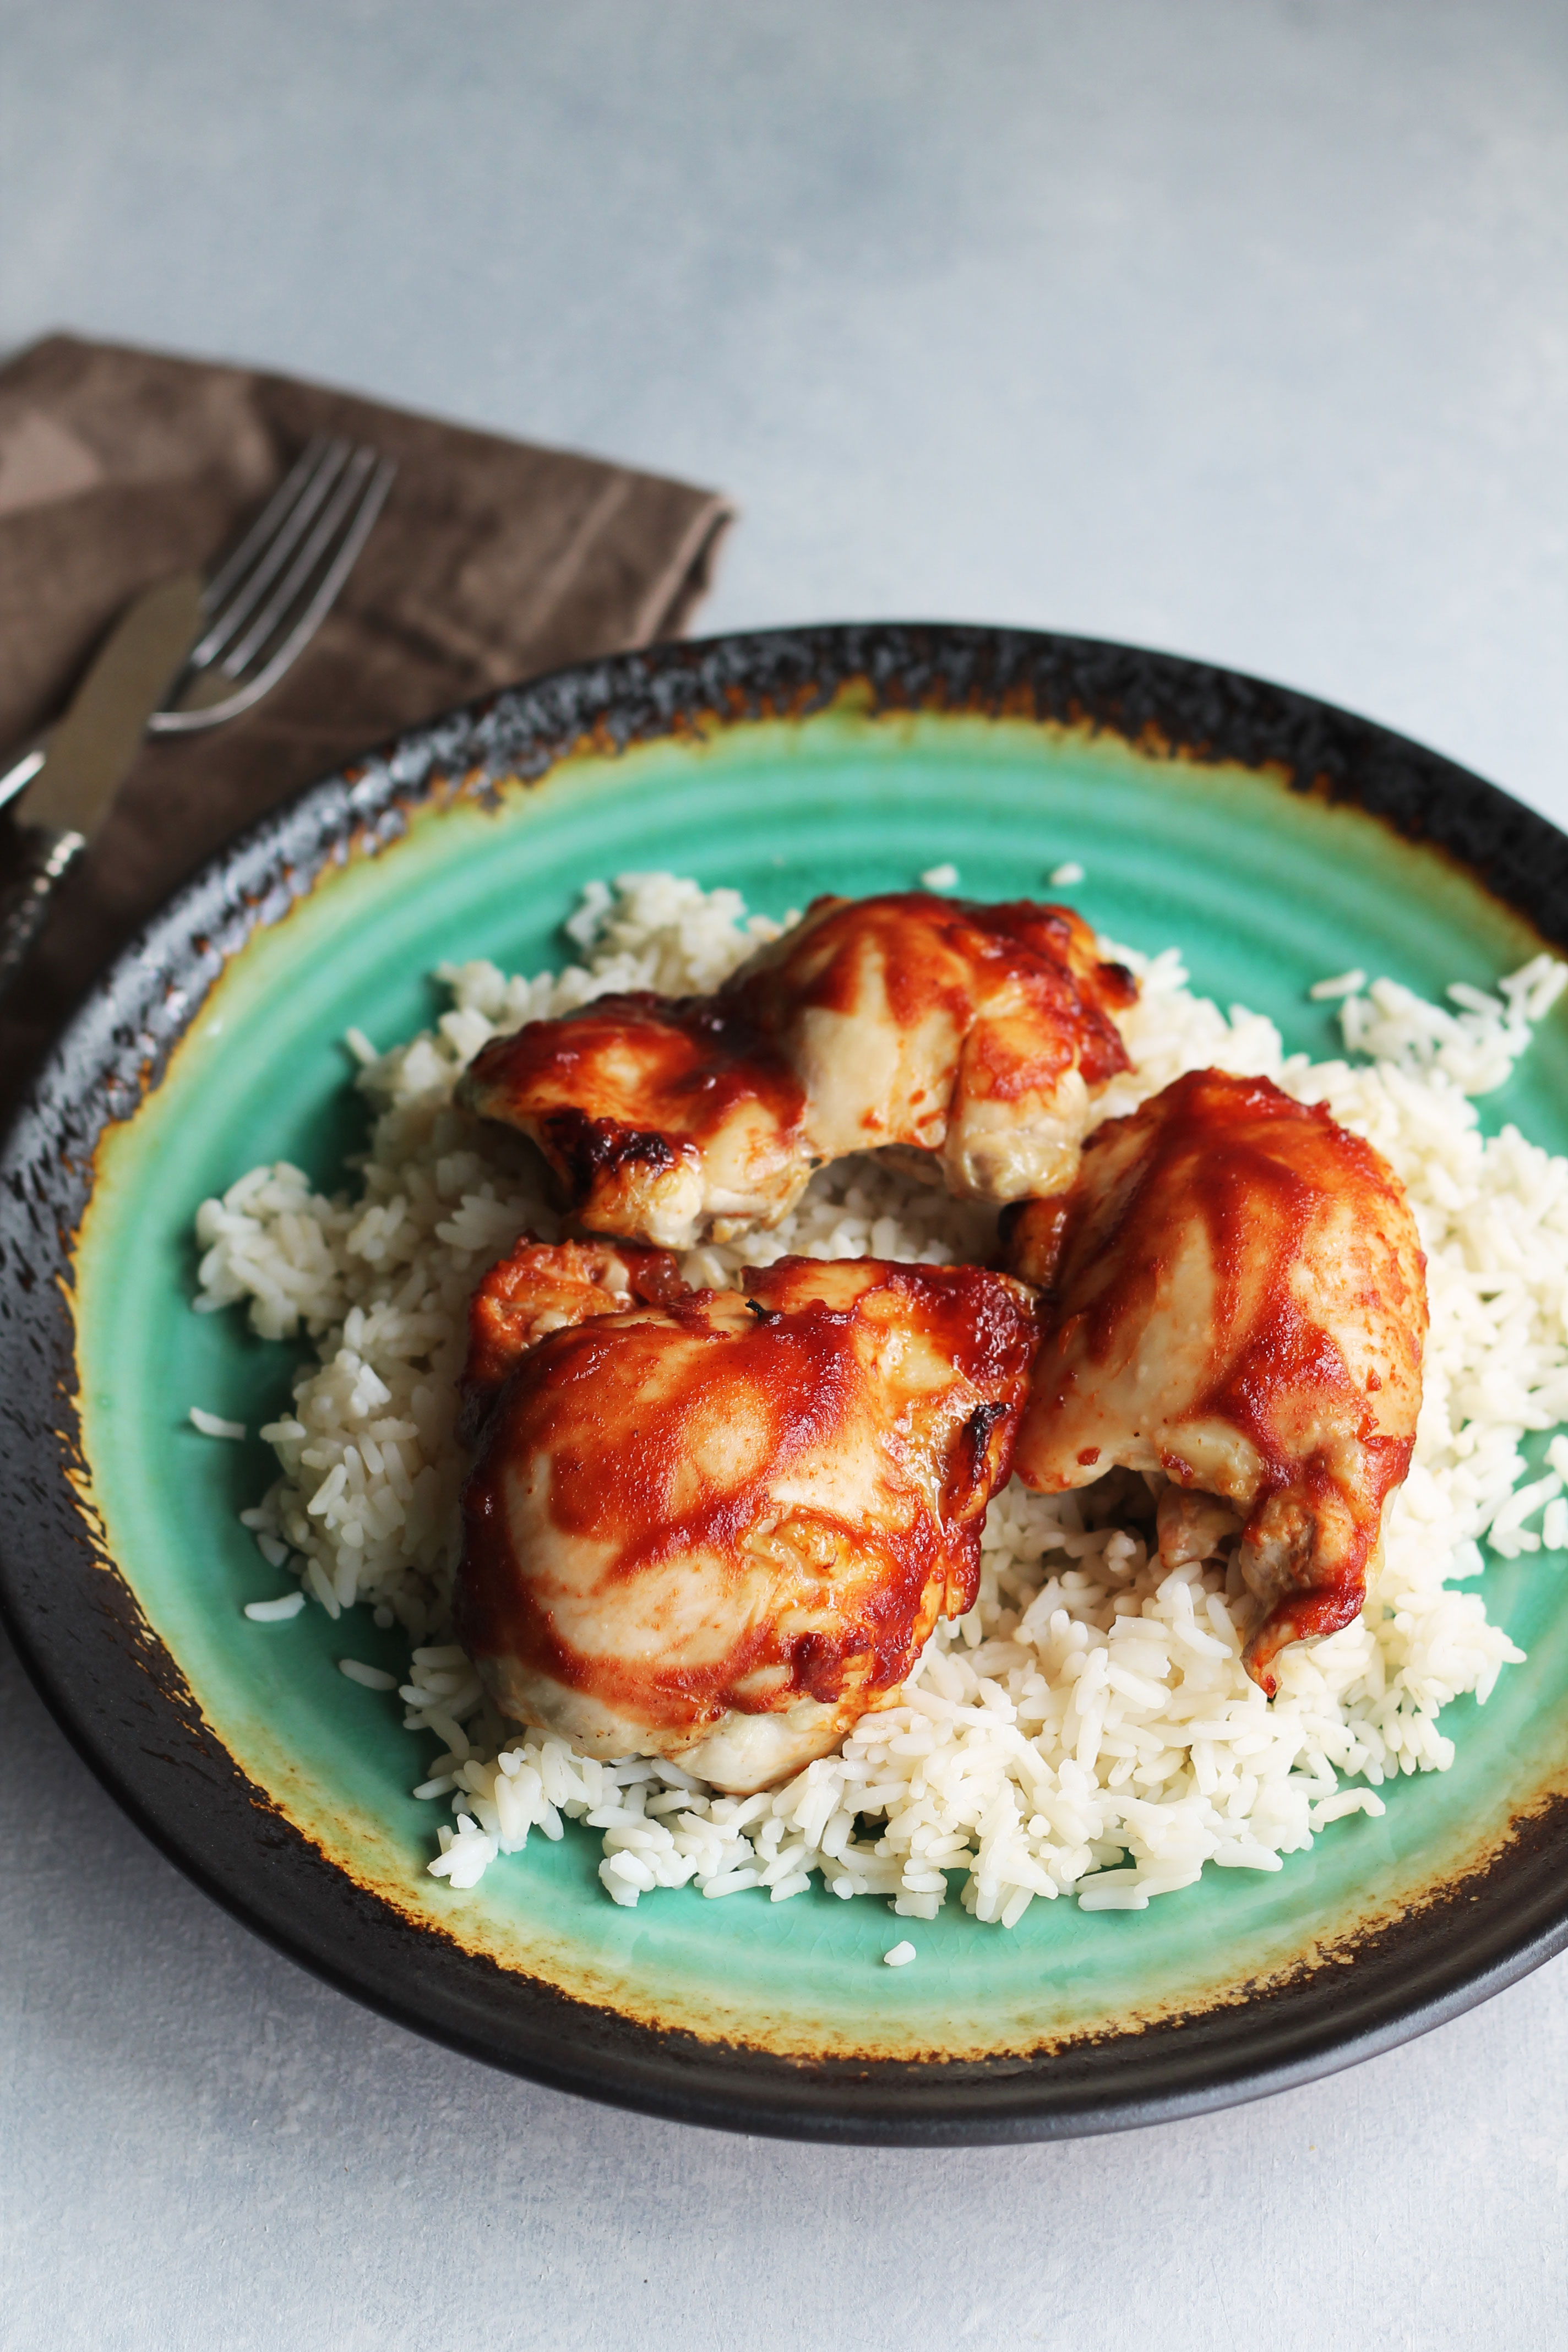 Skip the take out and make these Sweet and Sour Baked Chicken Thighs in the comfort of your own home